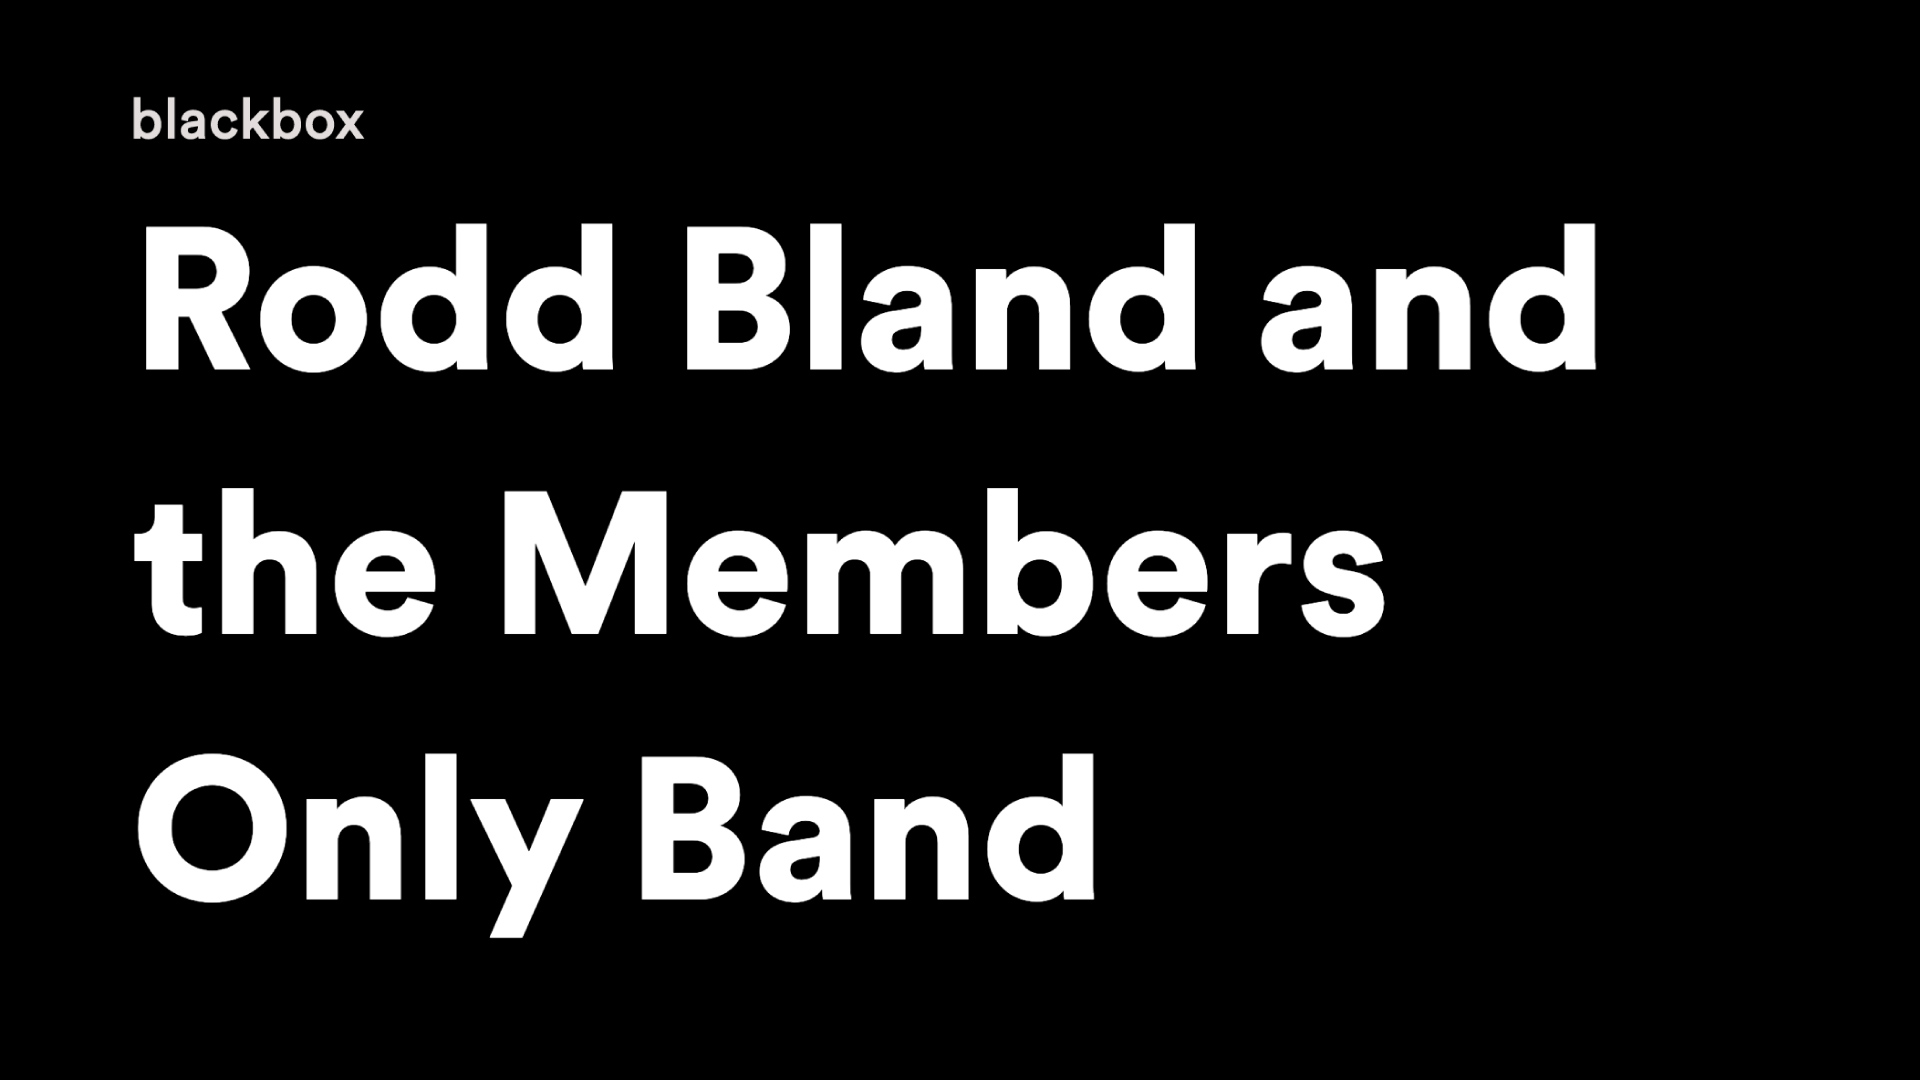 Rodd Bland and the Members Only Band